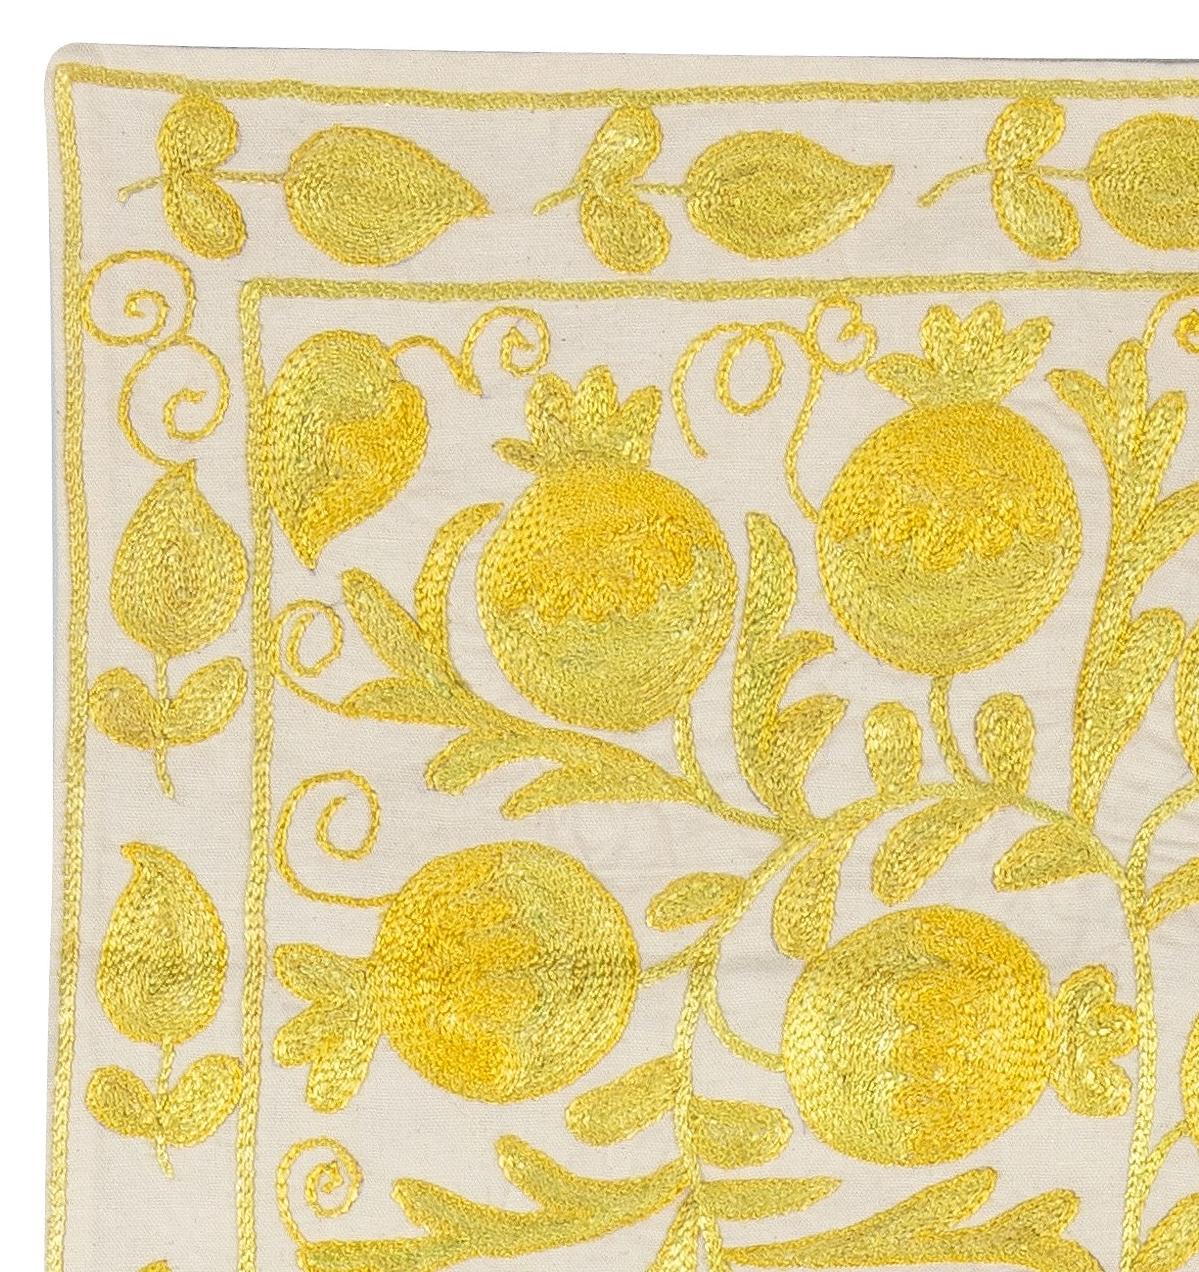 Hand-Woven 17x17 inches Decorative Silk Hand Embroidery Suzani Cushion Cover Ivory & Yellow For Sale